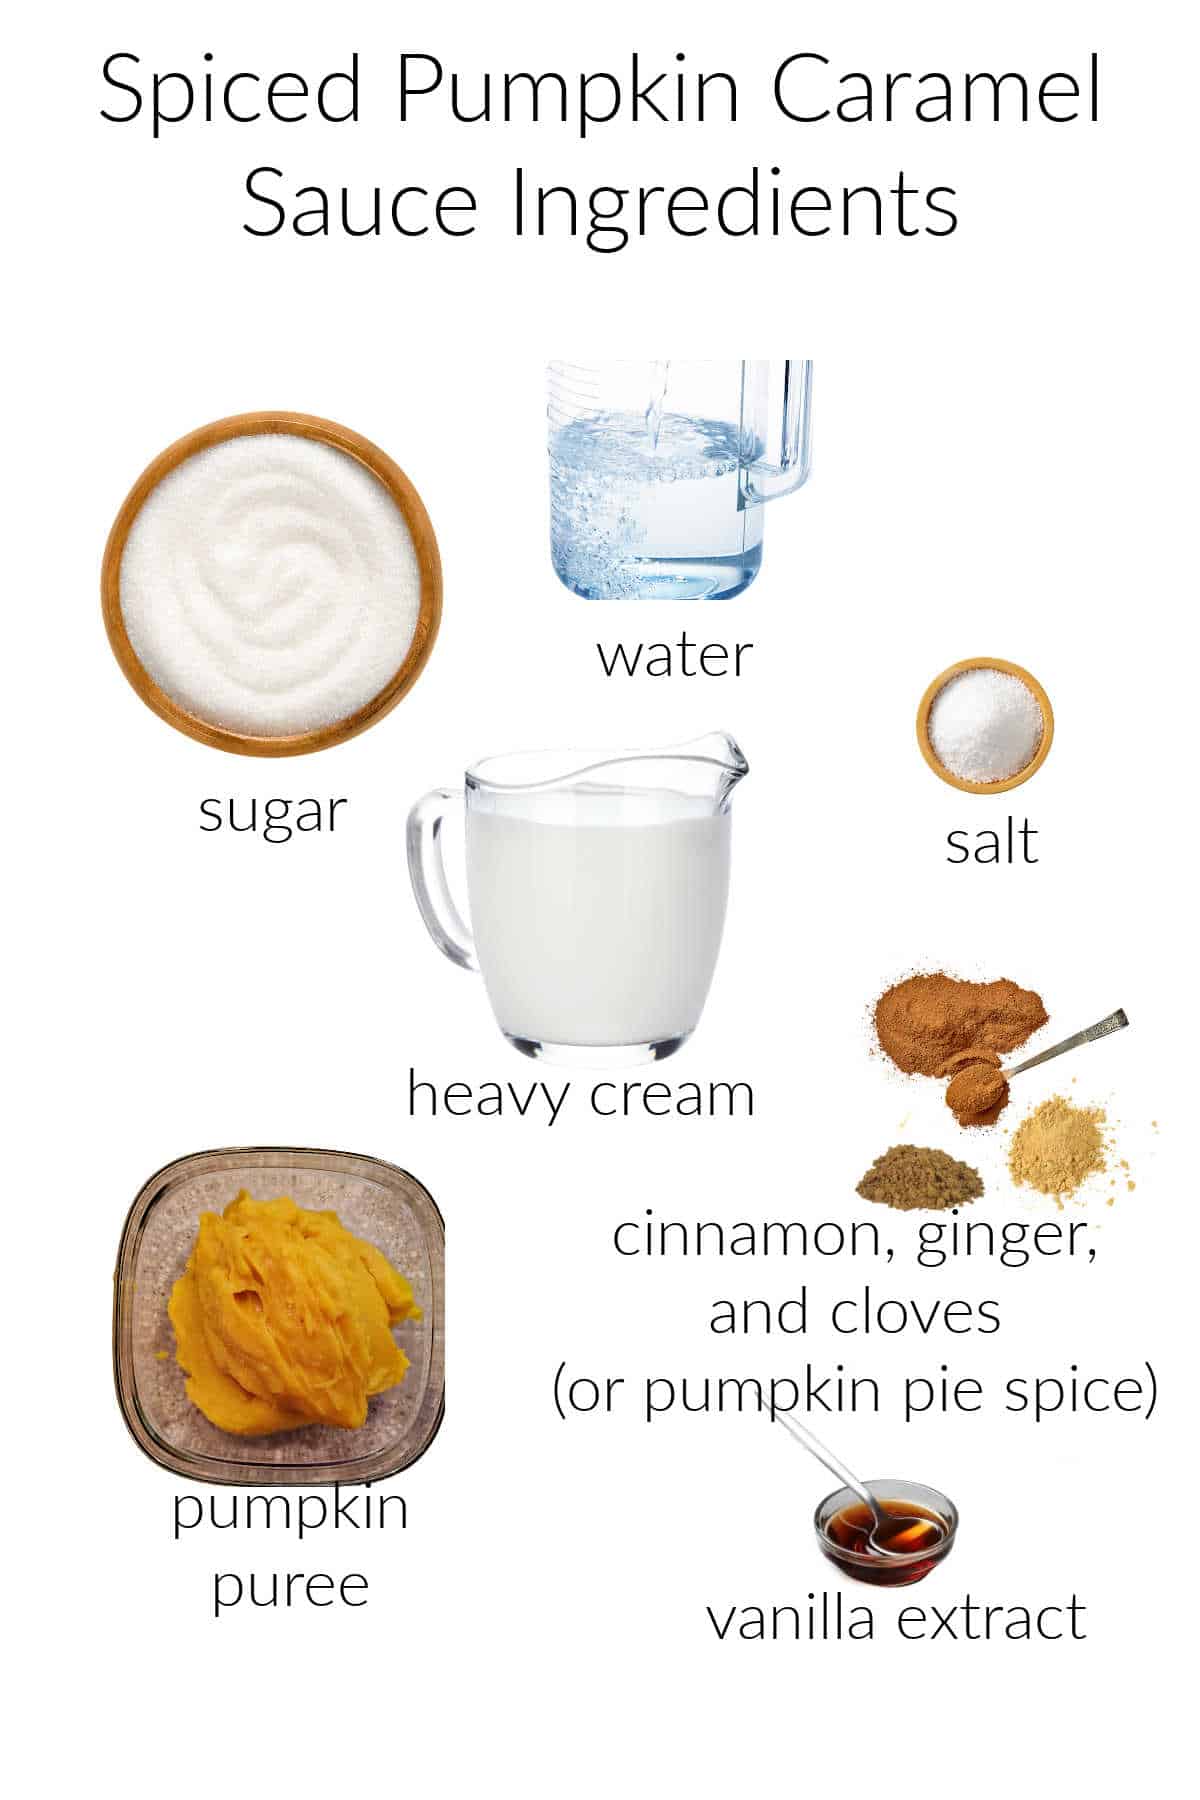 A collage of ingredients for making spiced pumpkin caramel sauce.